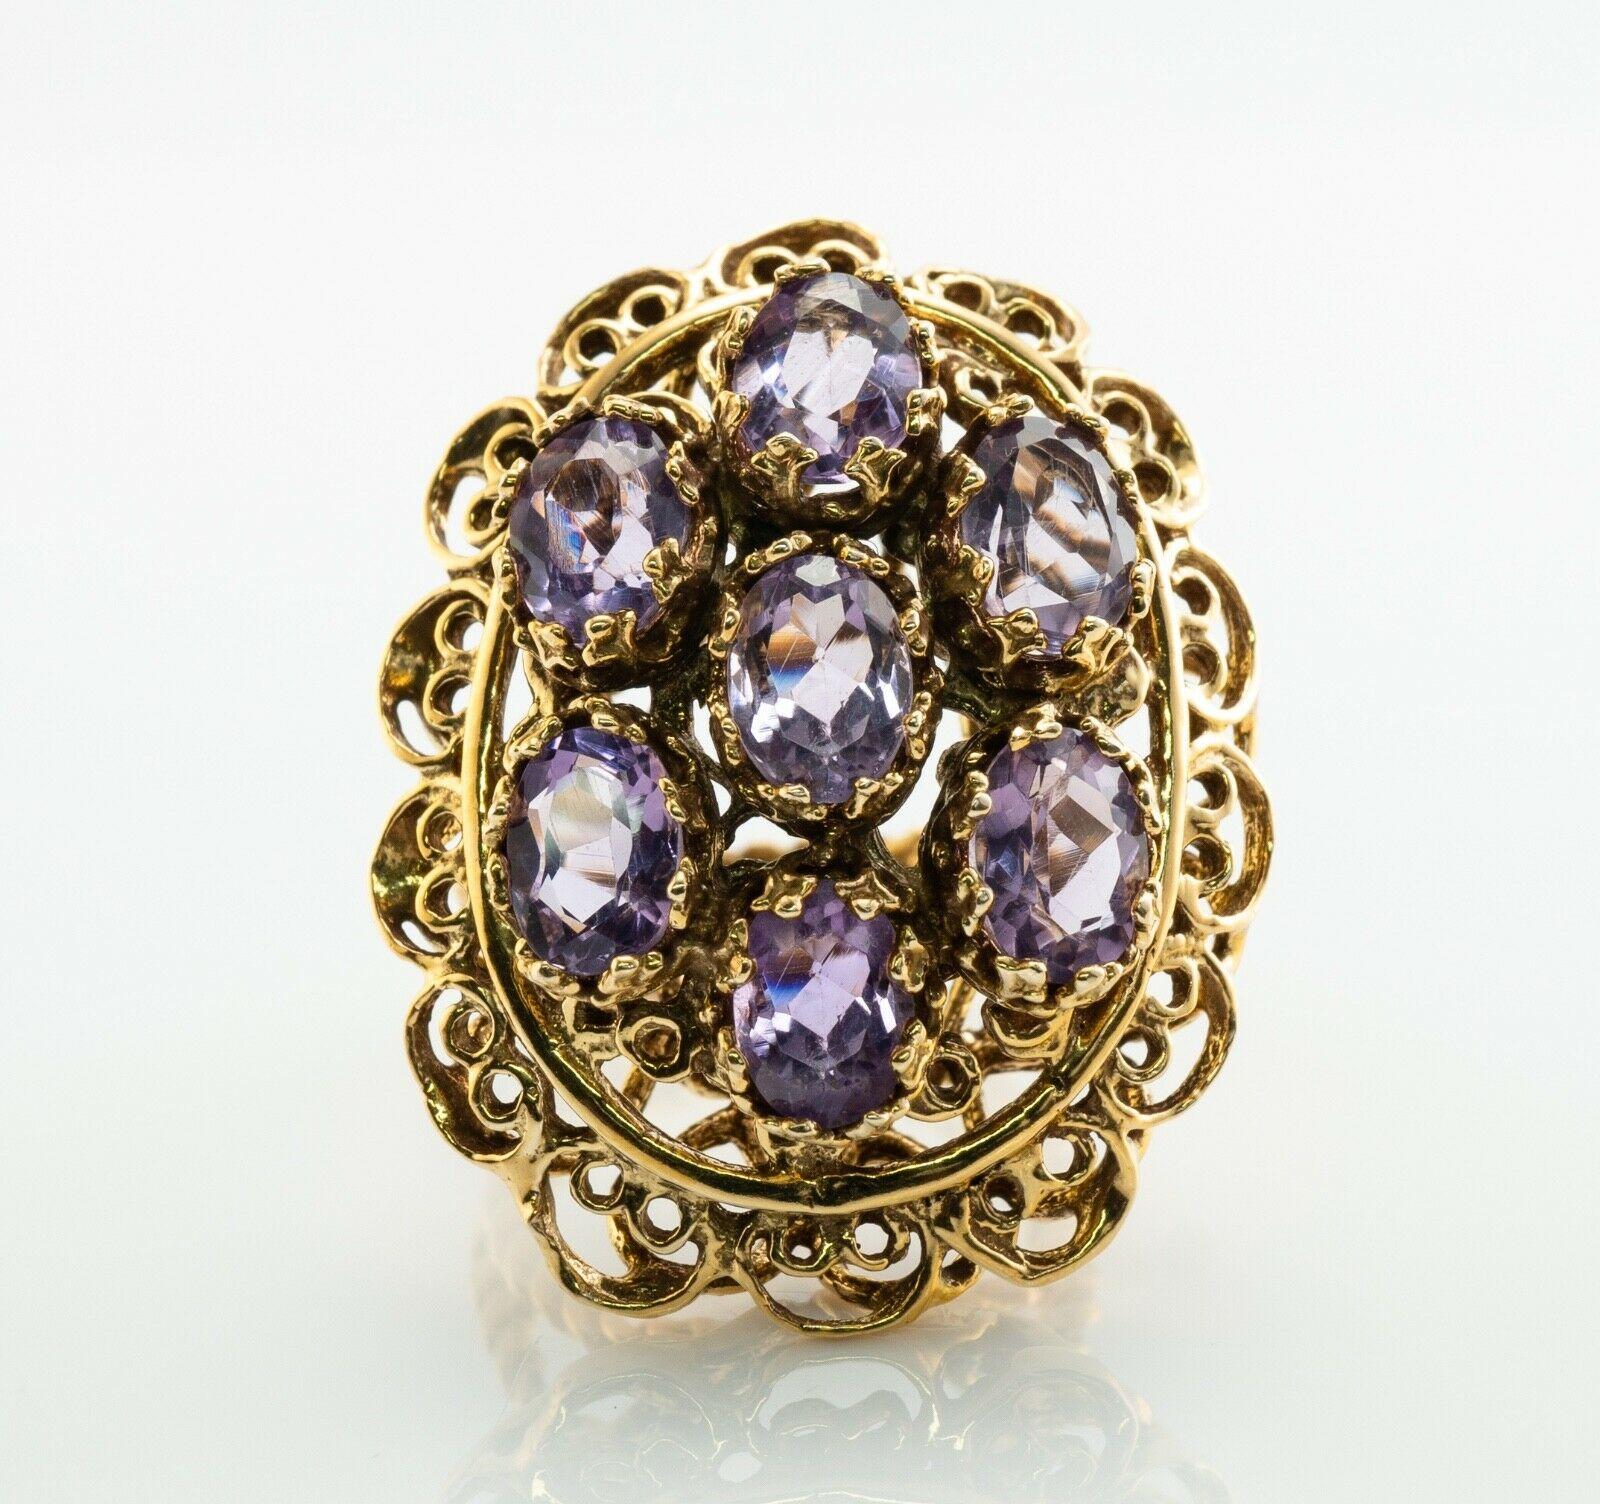 This stunning vintage ring is finely crafted in solid 14K Yellow Gold (carefully tested and guaranteed) and set with genuine Earth mined Amethysts. Seven oval cut gems measure 7mm x 5mm each totaling 5.95 carats. All stones are original to the